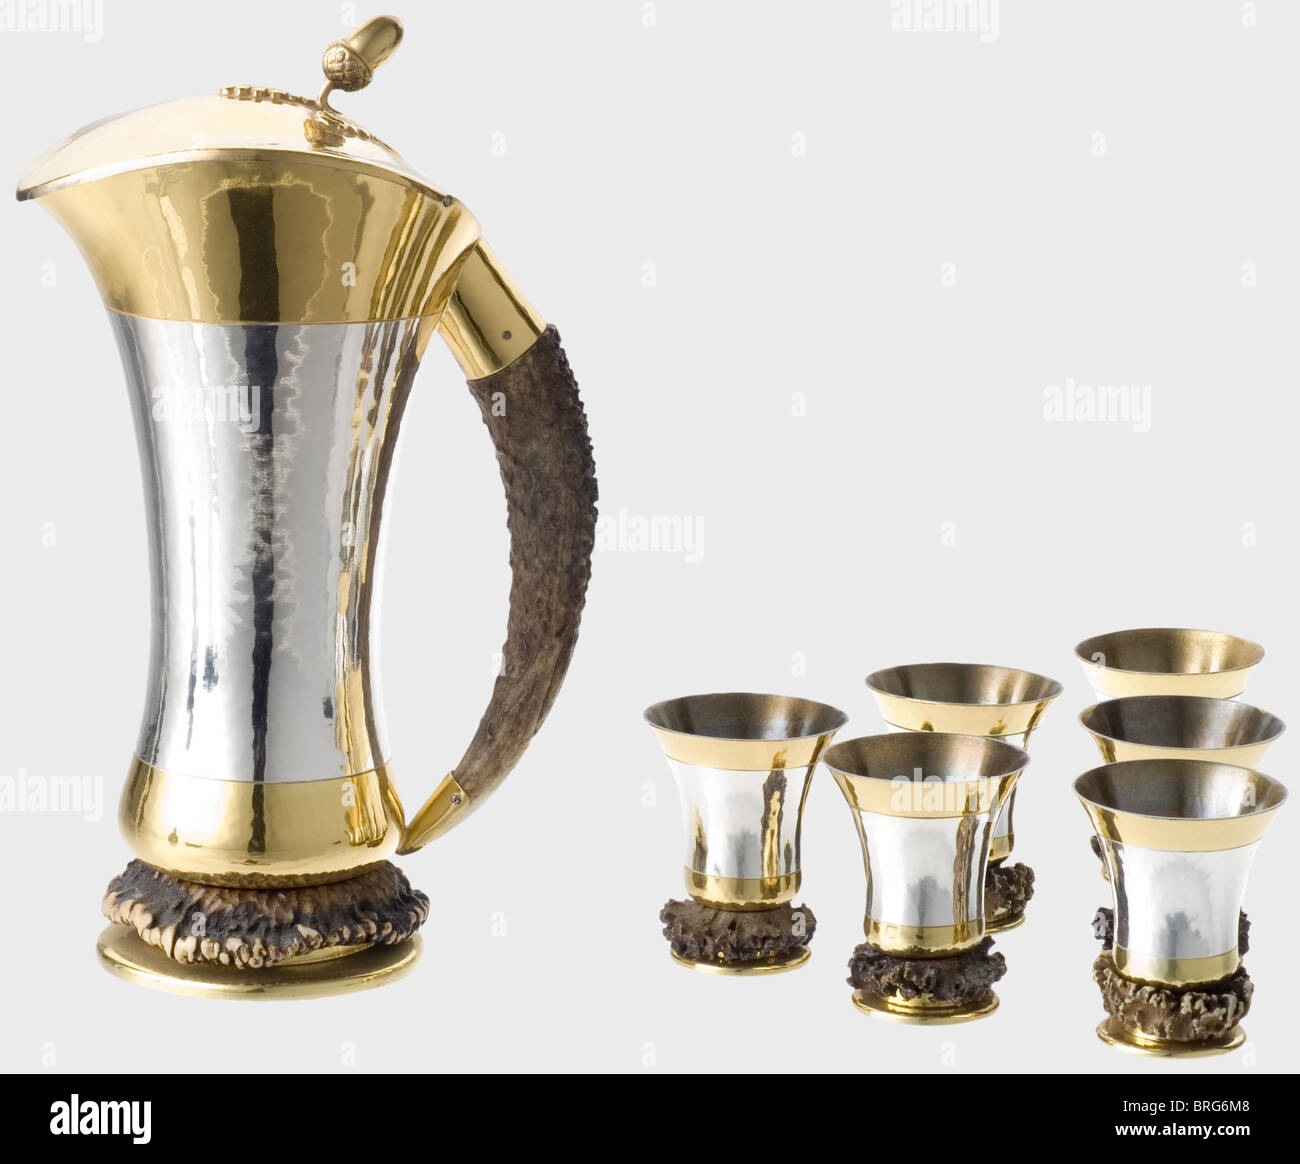 Hermann Göring,a hunter's drinking set Gilded silver hunting tankard.Hand hammered silver,with gilded base,lid,and edge of the lip.Antler tine as a handle.Massive antler rosette on the base.The lid bears a sculpted acorn and oak leaves in relief.Marked "Handarbeit","925" next to a crescent moon and crown,"HW",and "Sterling" on the bottom.Height 23 cm.Weight 654 g.Also six matching beakers in the same style and with the same marks.Heights 61 mm.Weights 56 to 62.5 g.To our knowledge this is part of a larger set,which Hermann Göring received on ,Additional-Rights-Clearences-Not Available Stock Photo